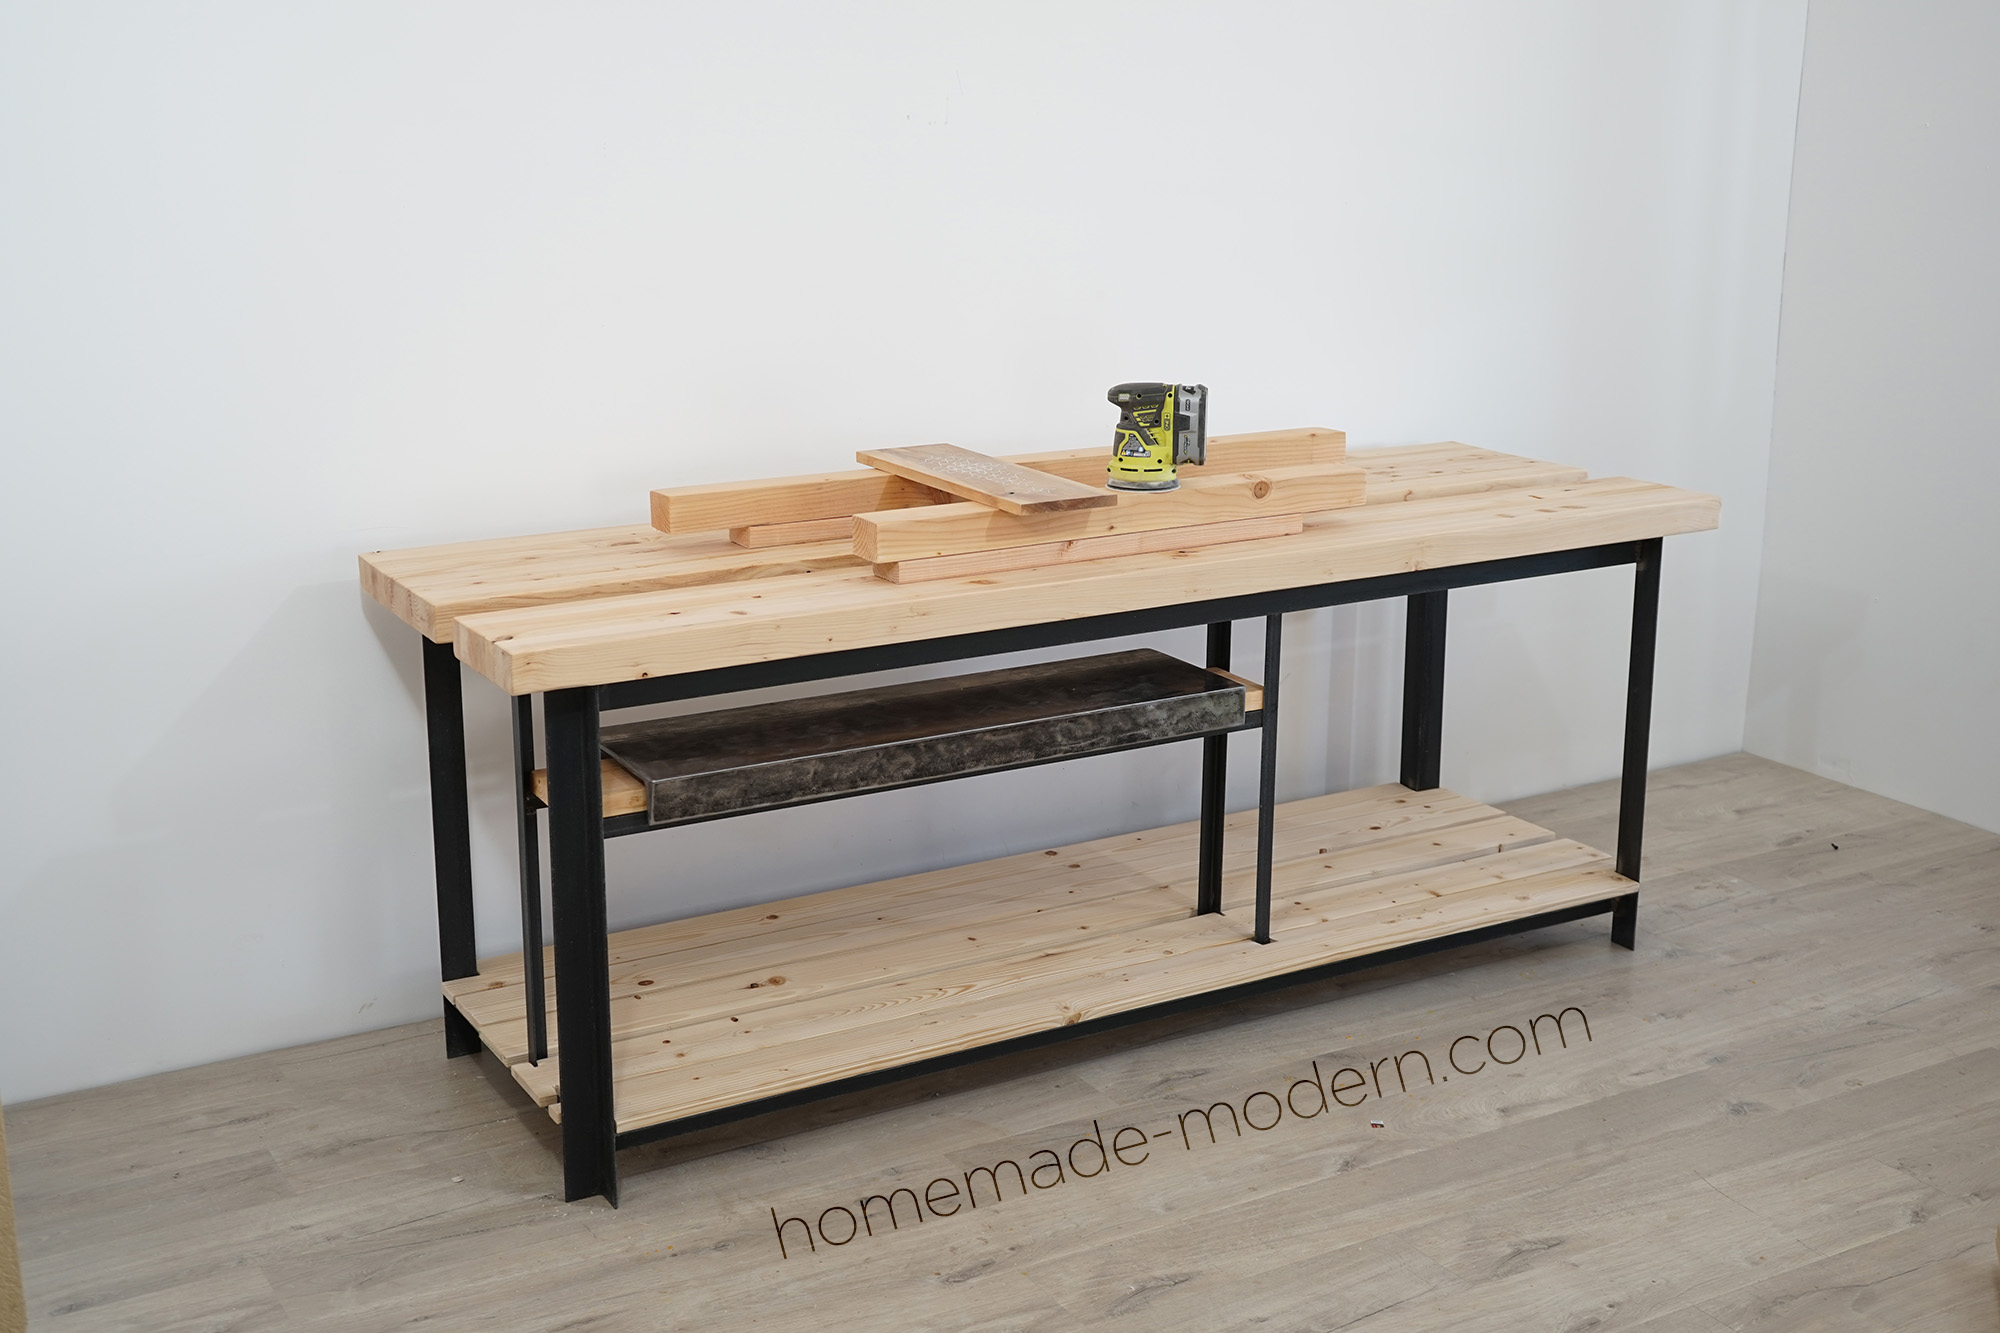 Ben Uyeda of HomeMade Modern designed and built this split top workbench with a removable steel top. For more information go to HomeMade-Modern.com